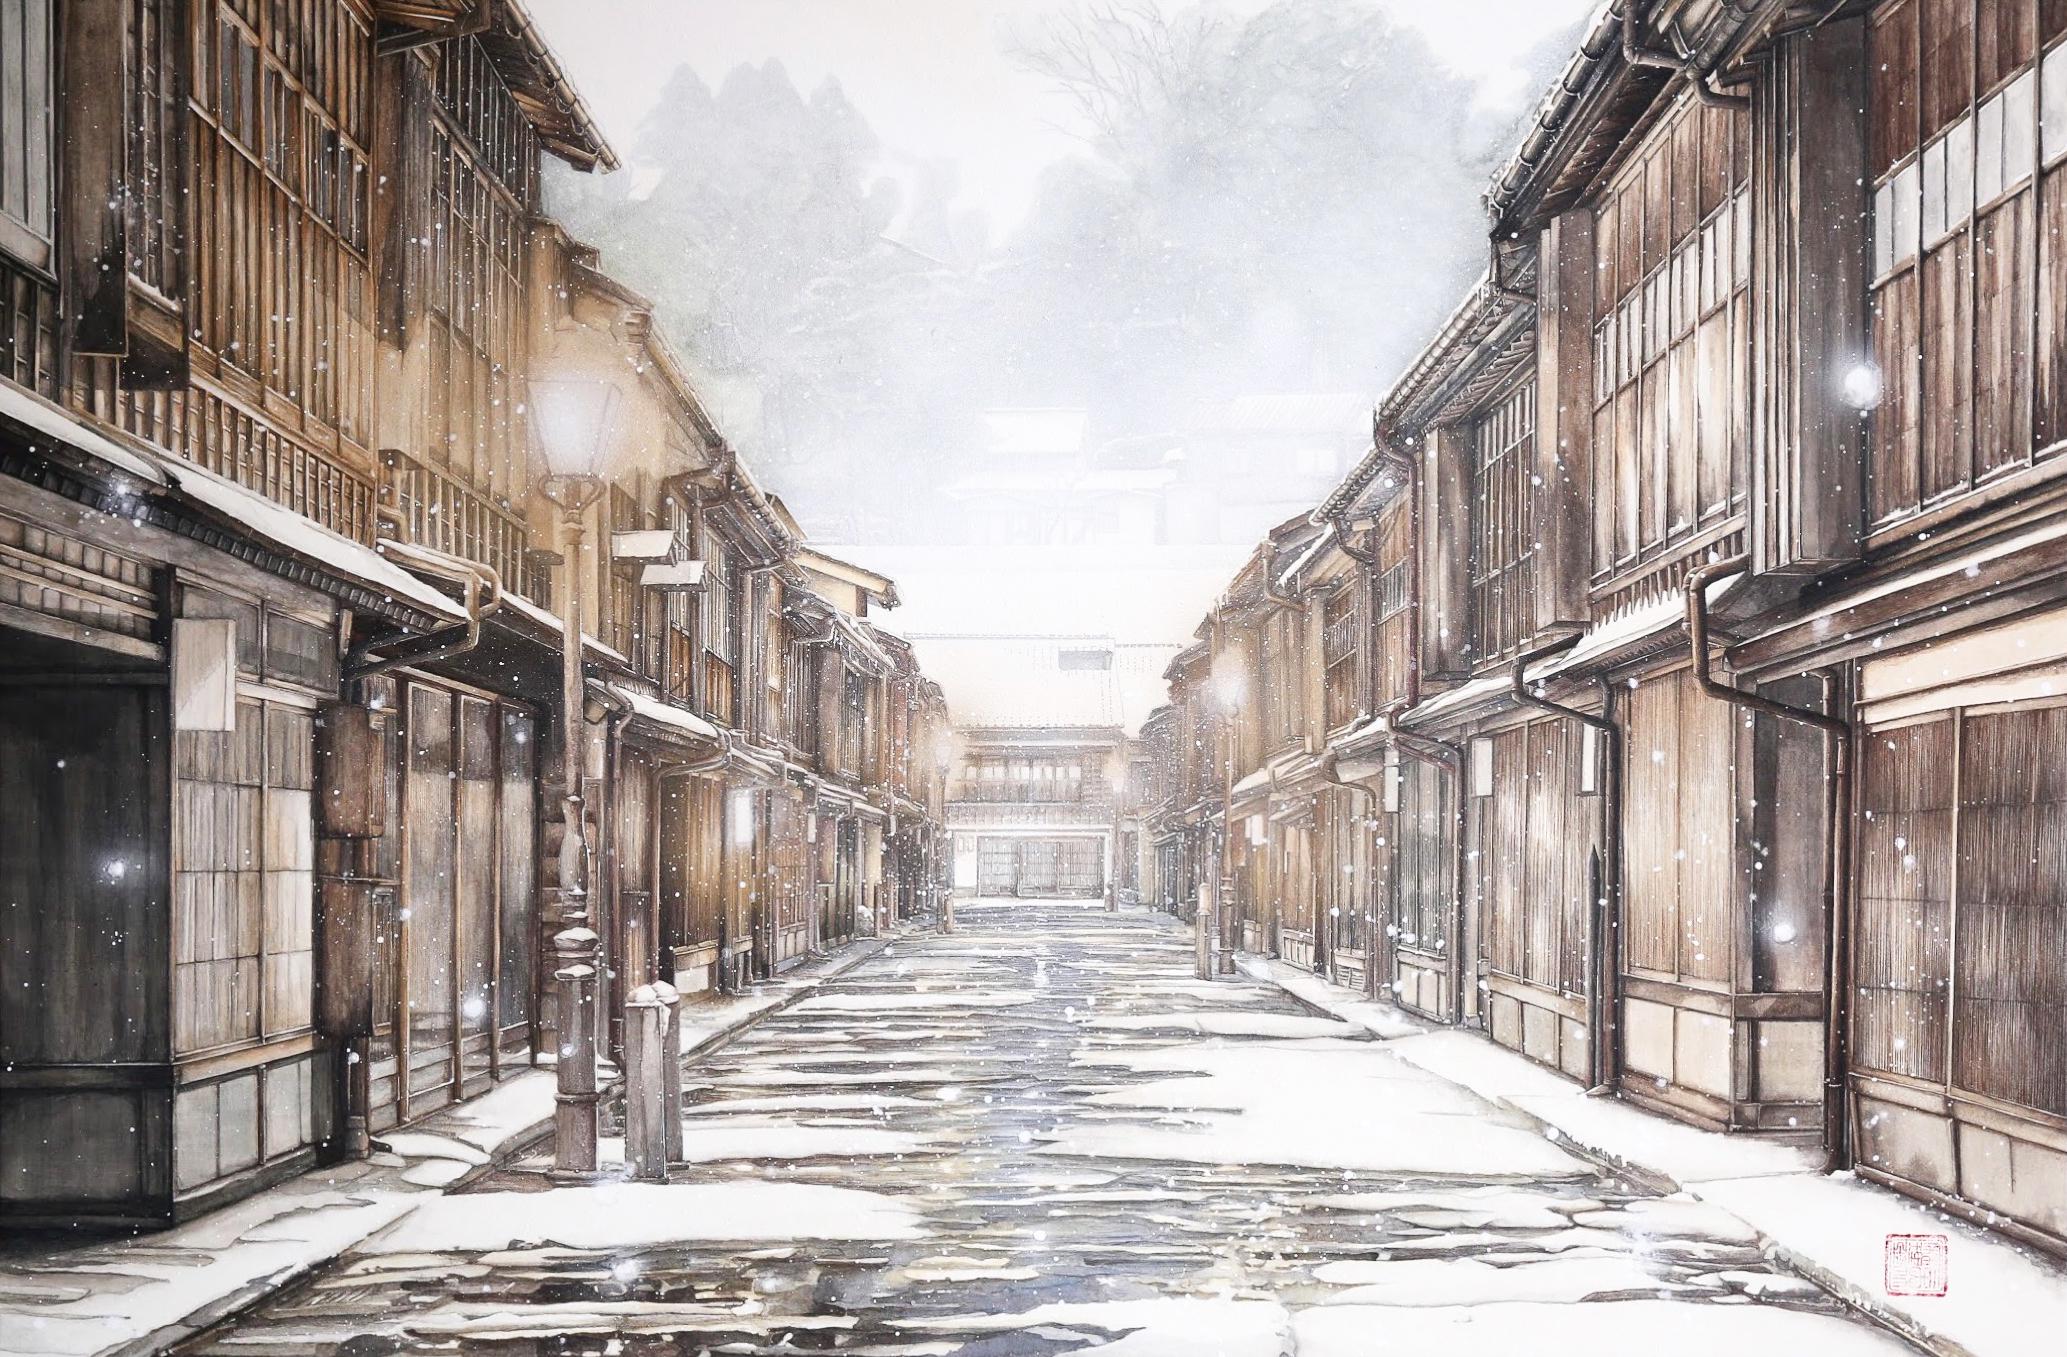 Maria Mitsumori Landscape Painting - Kanazawa - Japanese Cityscape Painting in 24k Gold and Minerals, Realism, Winter